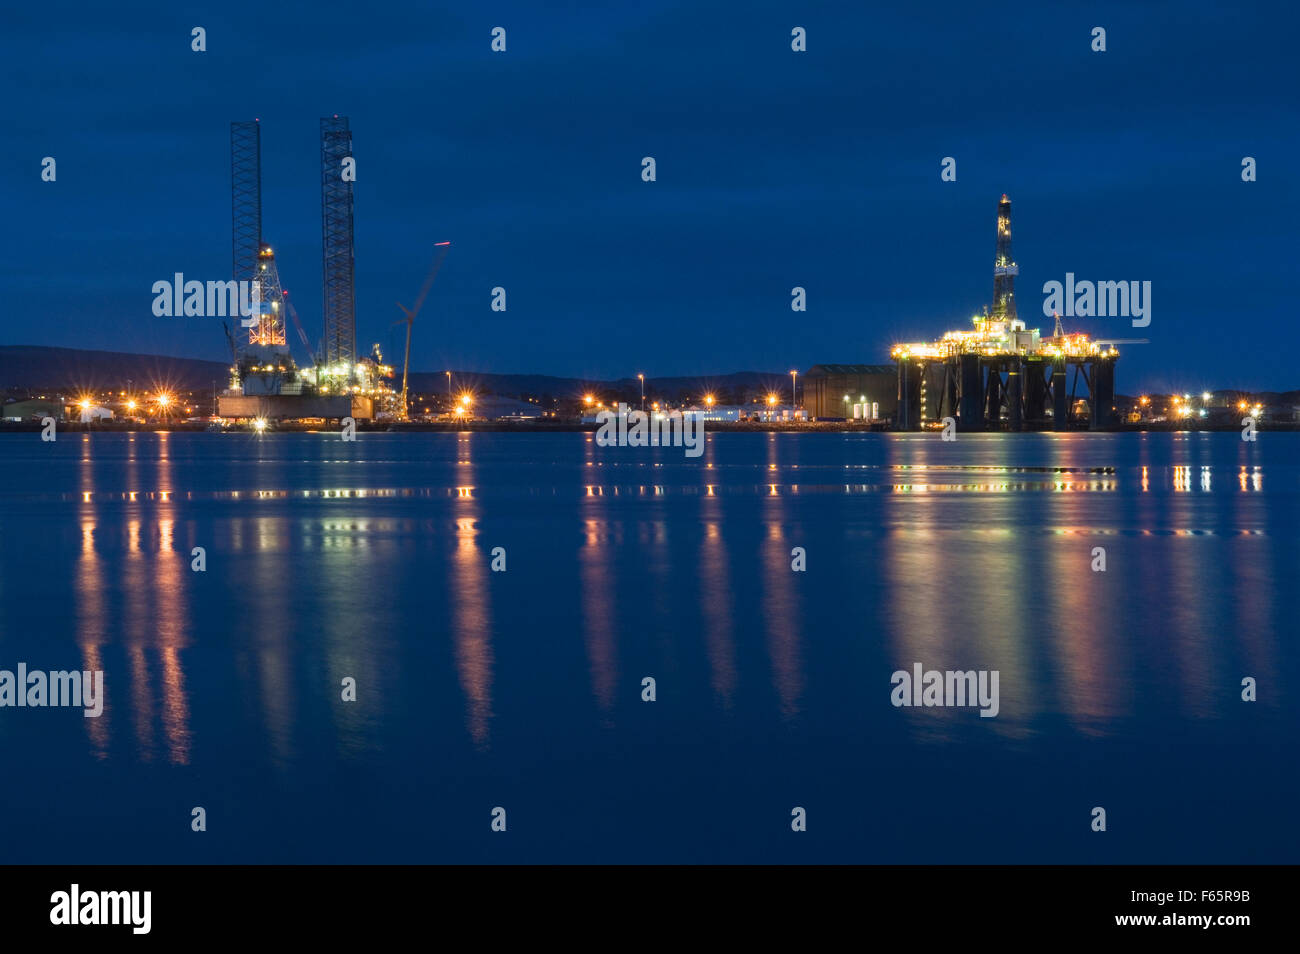 Oil rigs moored in the Cromarty Firth in Invergordon at dusk, Ross-shire, Scotland, UK. Stock Photo